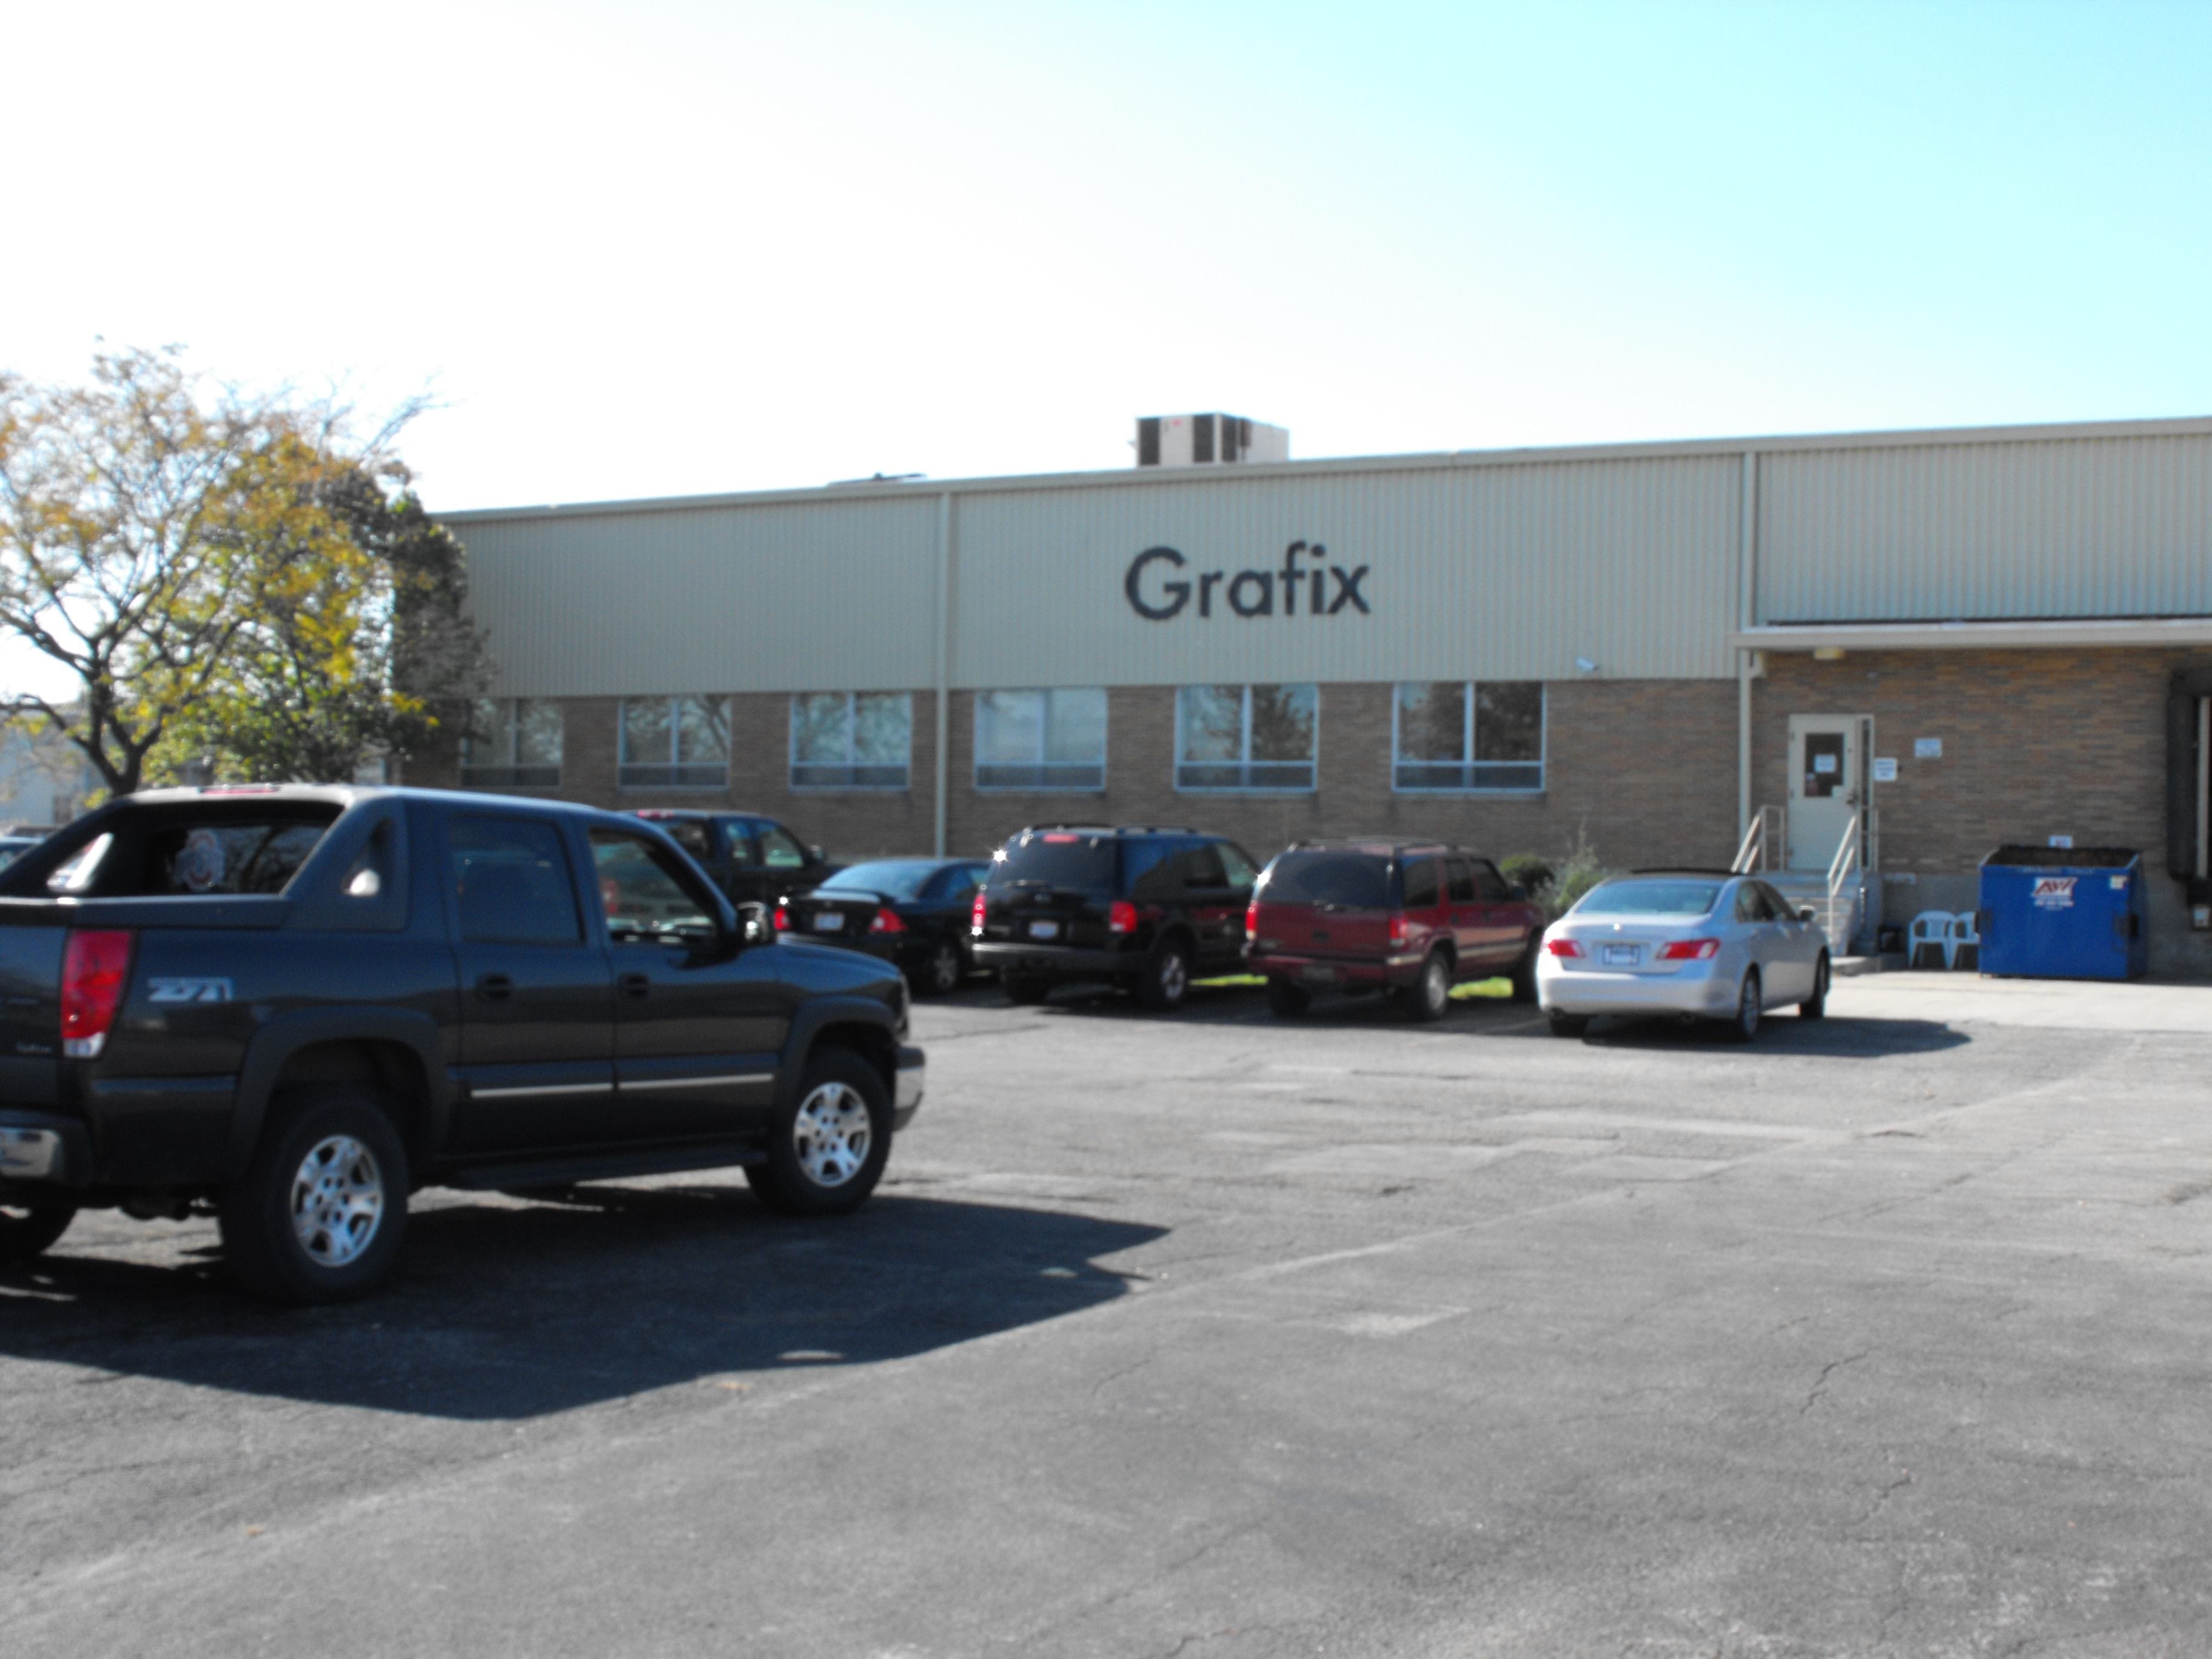 Grafix's central manufacturing facility in Maple Heights Ohio.